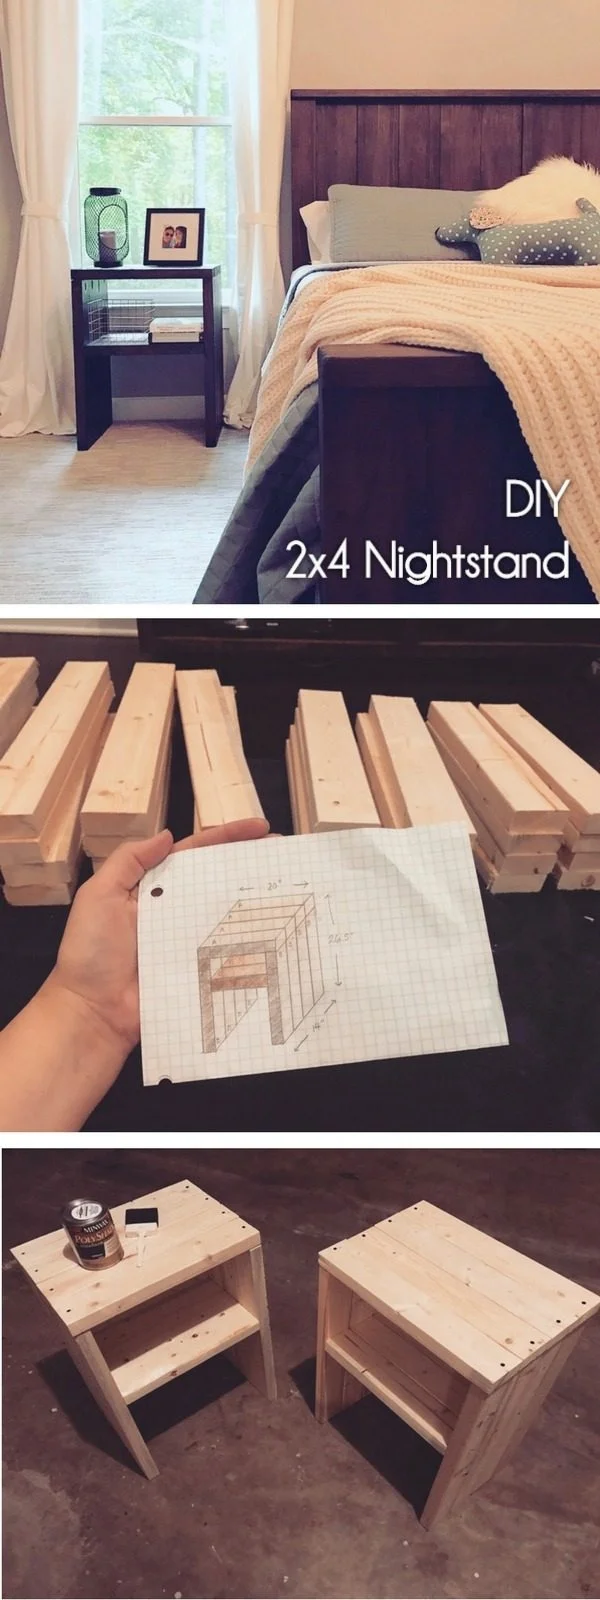 20 Crafty 2x4 DIY Projects That You Can Easily Make - Check out how to make a   nightstand from 2x4s  